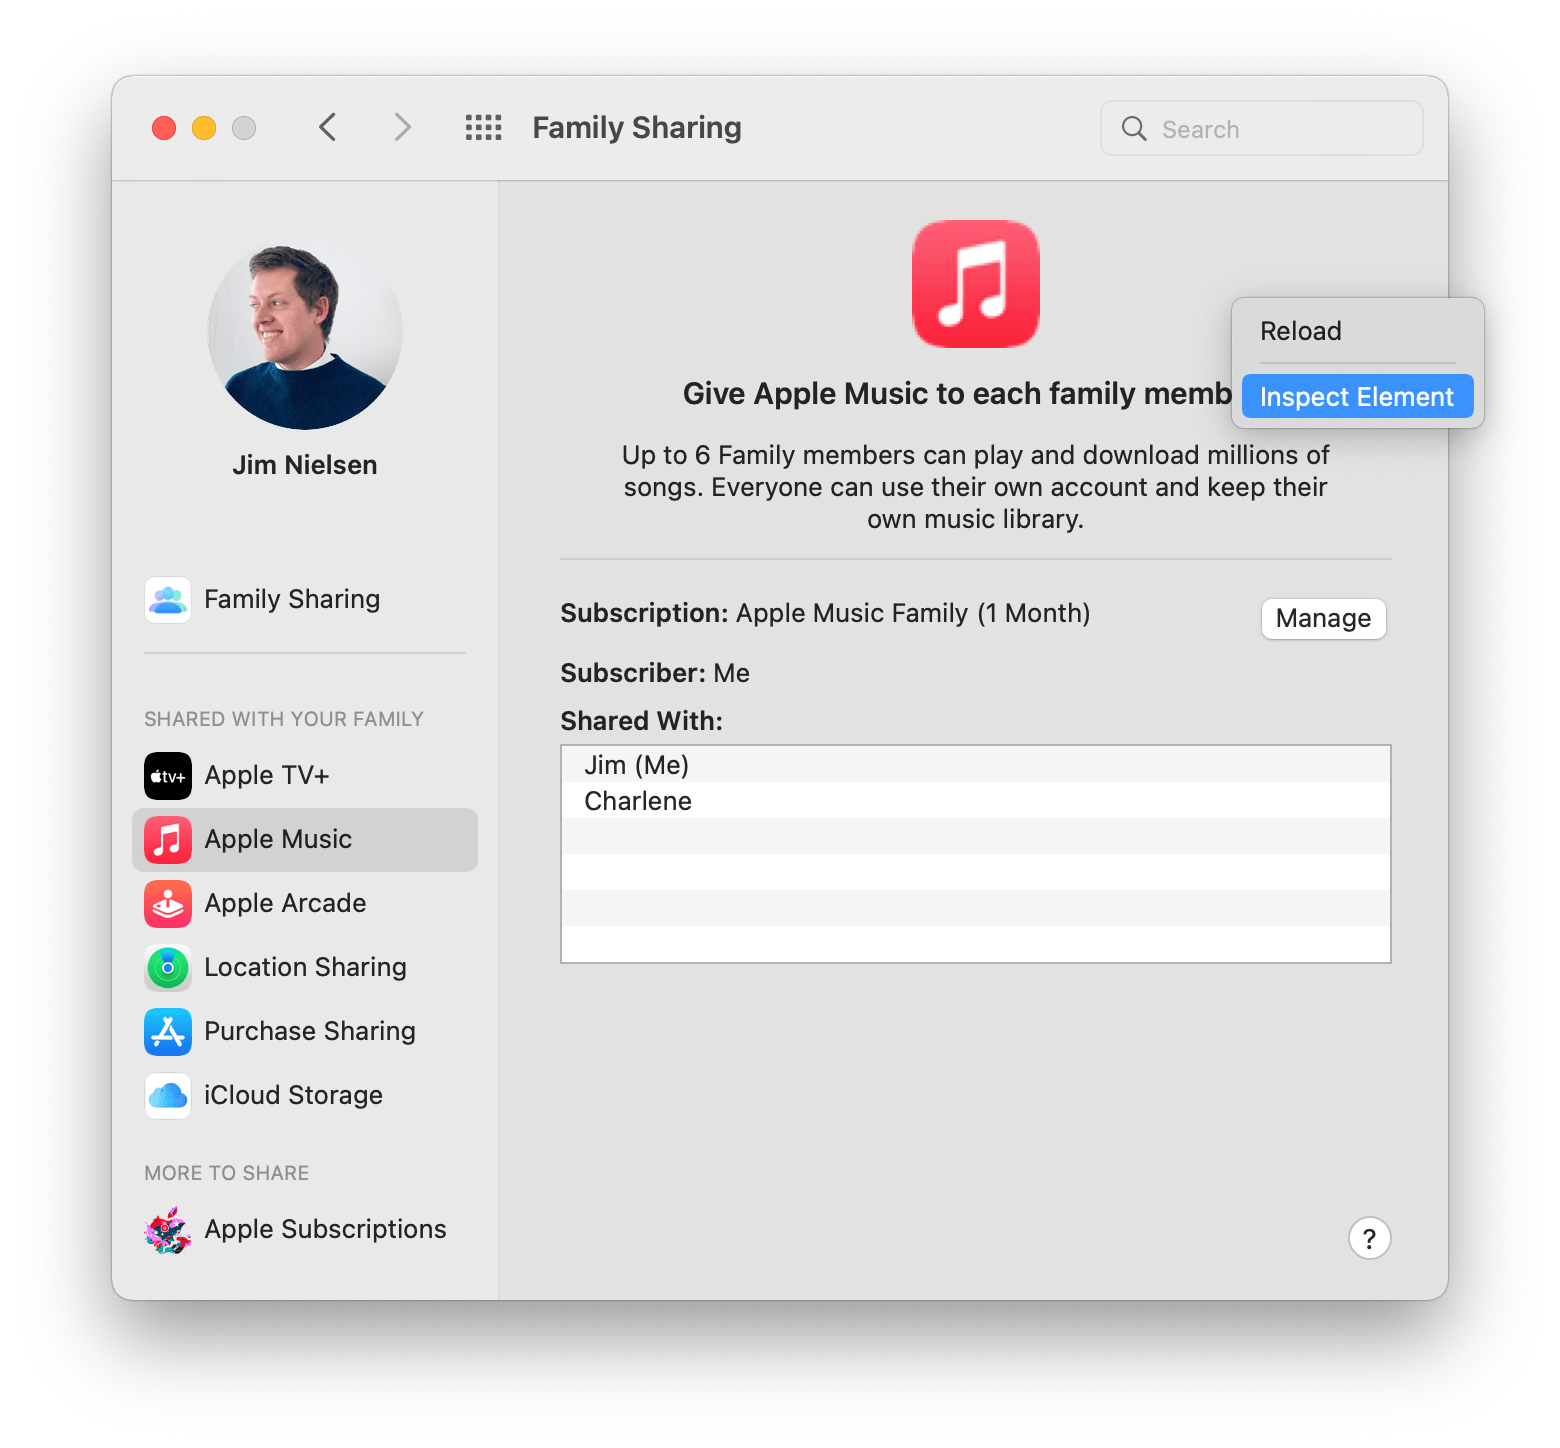 Screenshot of the Apple Music settings in the Family Sharing pane of system preferences on macOS with a “Inspect Element” context menu element visible.